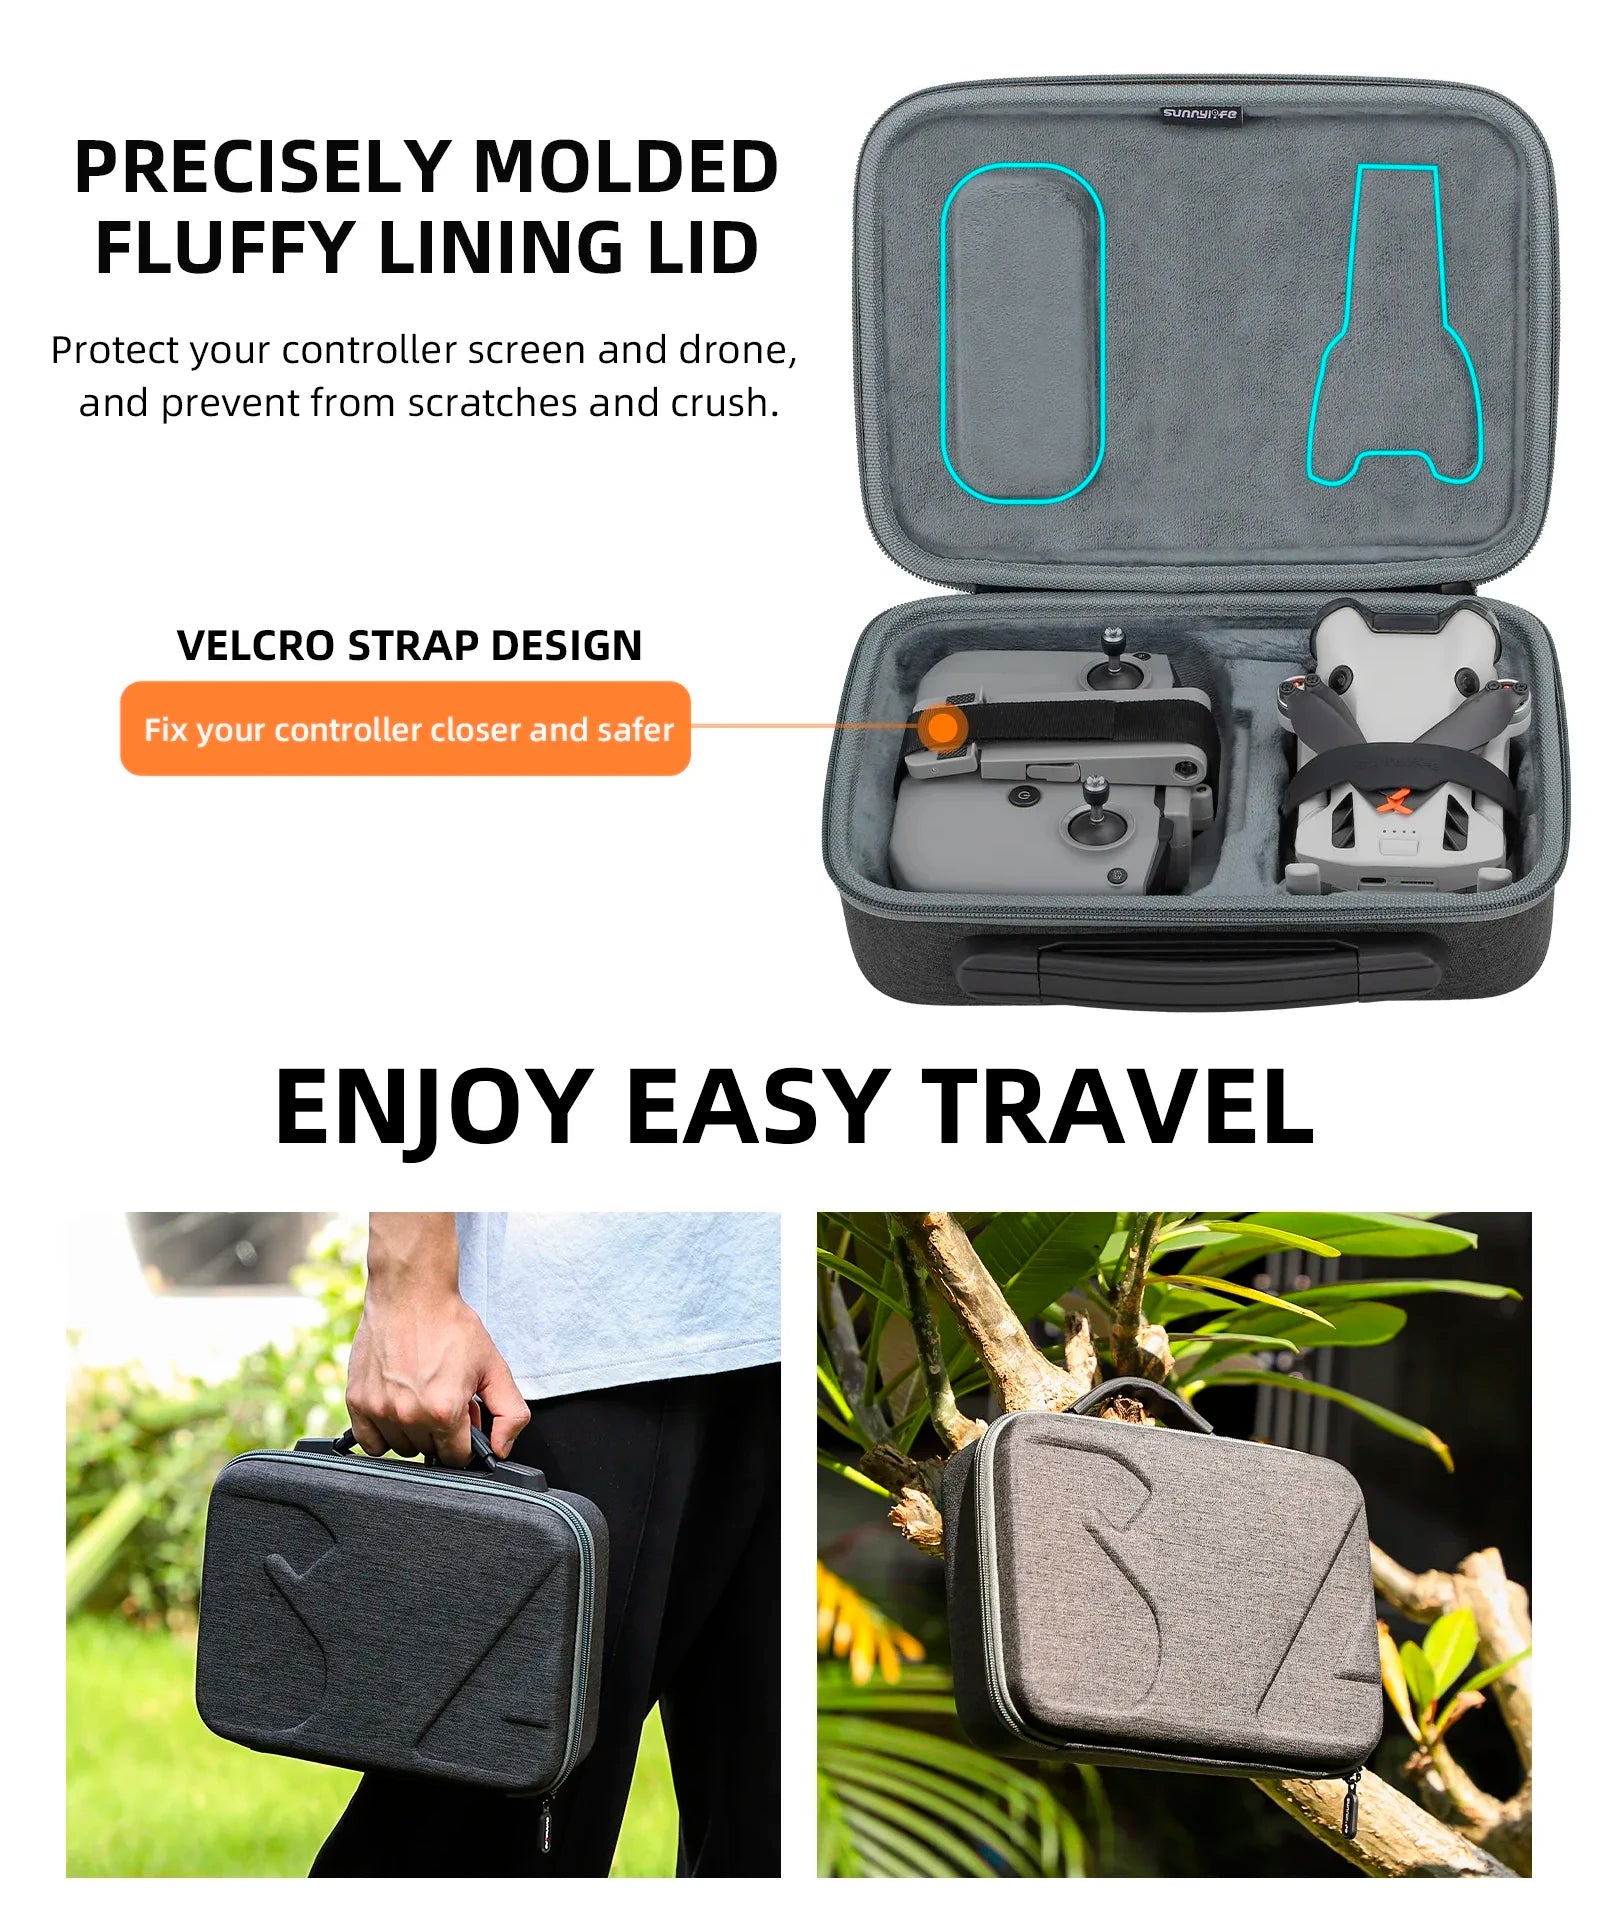 Portable Carrying Case For DJI Mini 4 Pro, Sunnyirfe PRECISELY MOLDED FLUFFY LINING